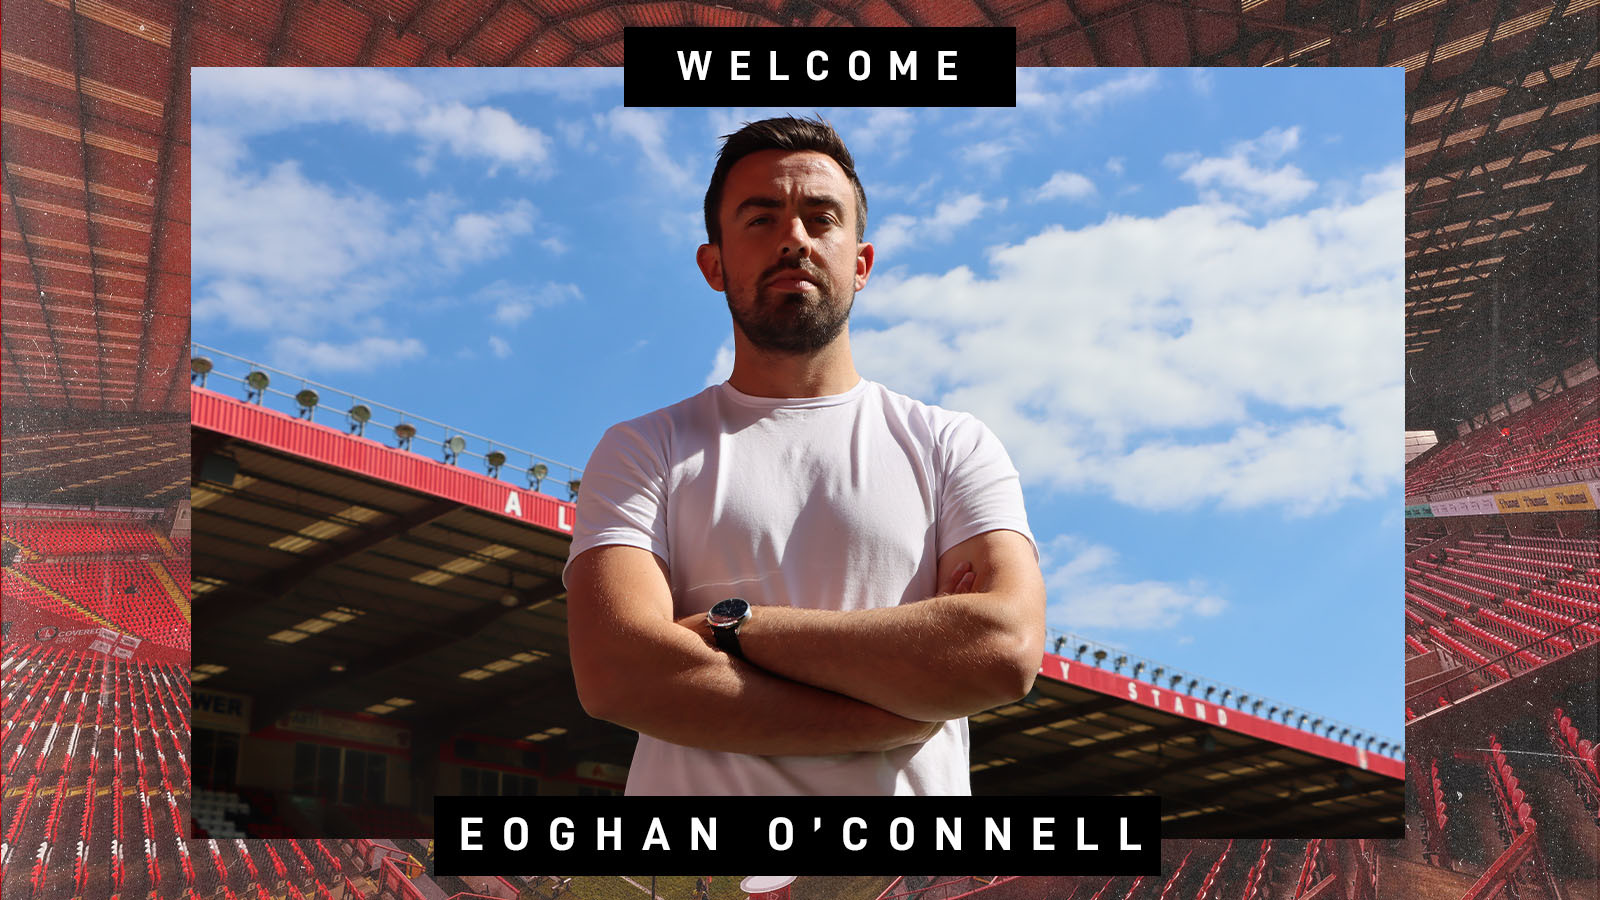 Welcome to The Valley, Eoghan O'Connell!